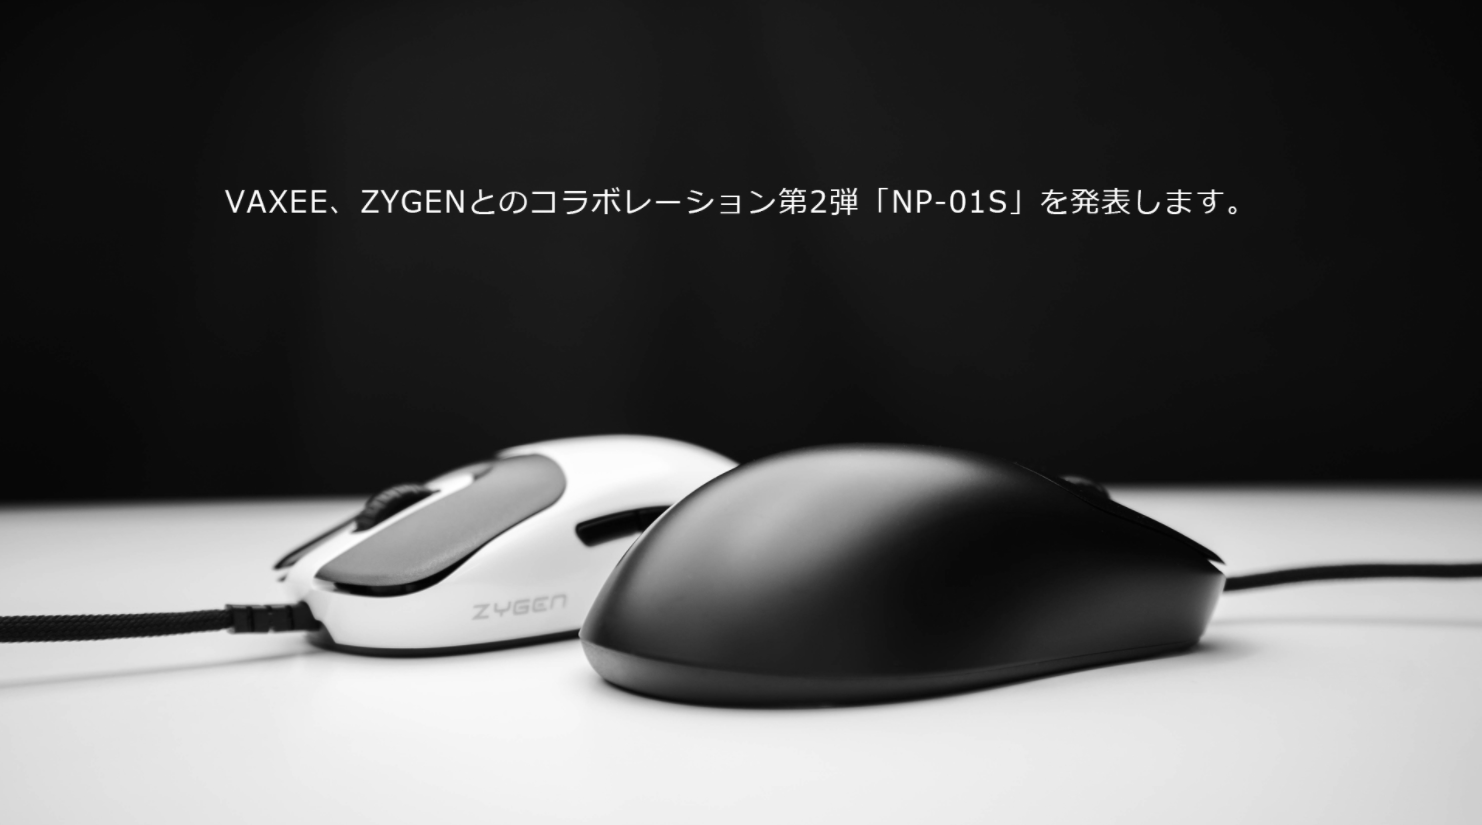 vaxee、ZYGENとのコラボレーションマウス第2弾として「NP-01S」を発表 ...